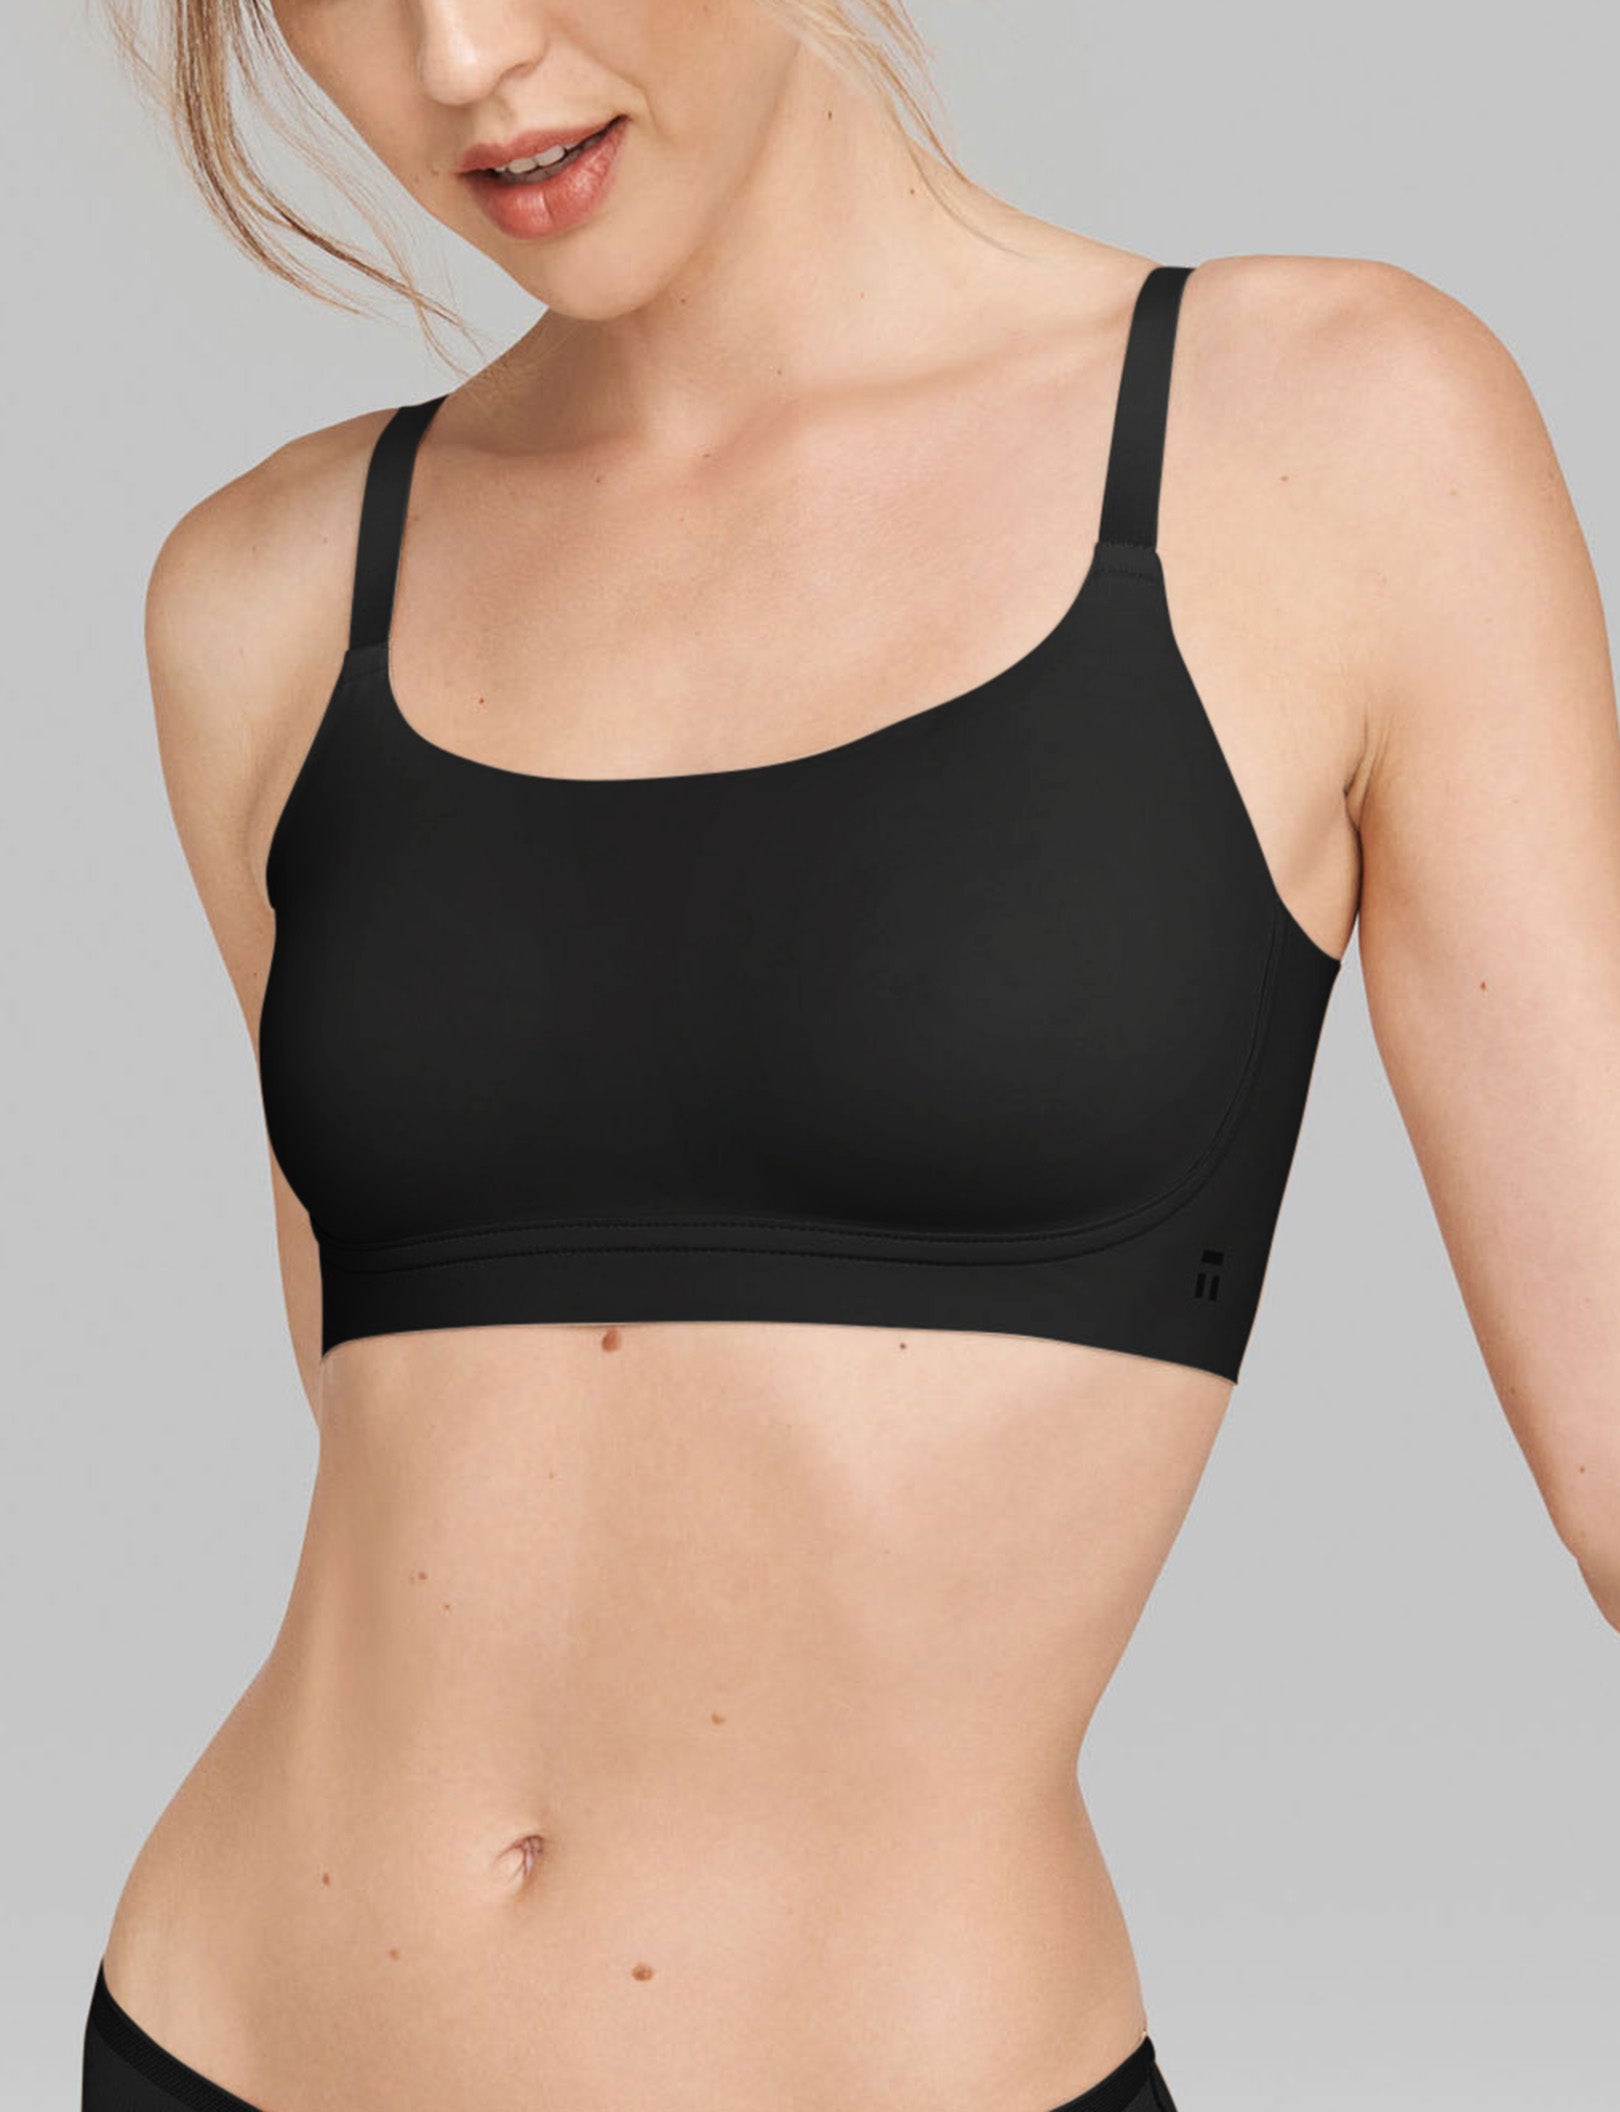 Introducing the Most Comfortable Bras on the Planet – Tommy John